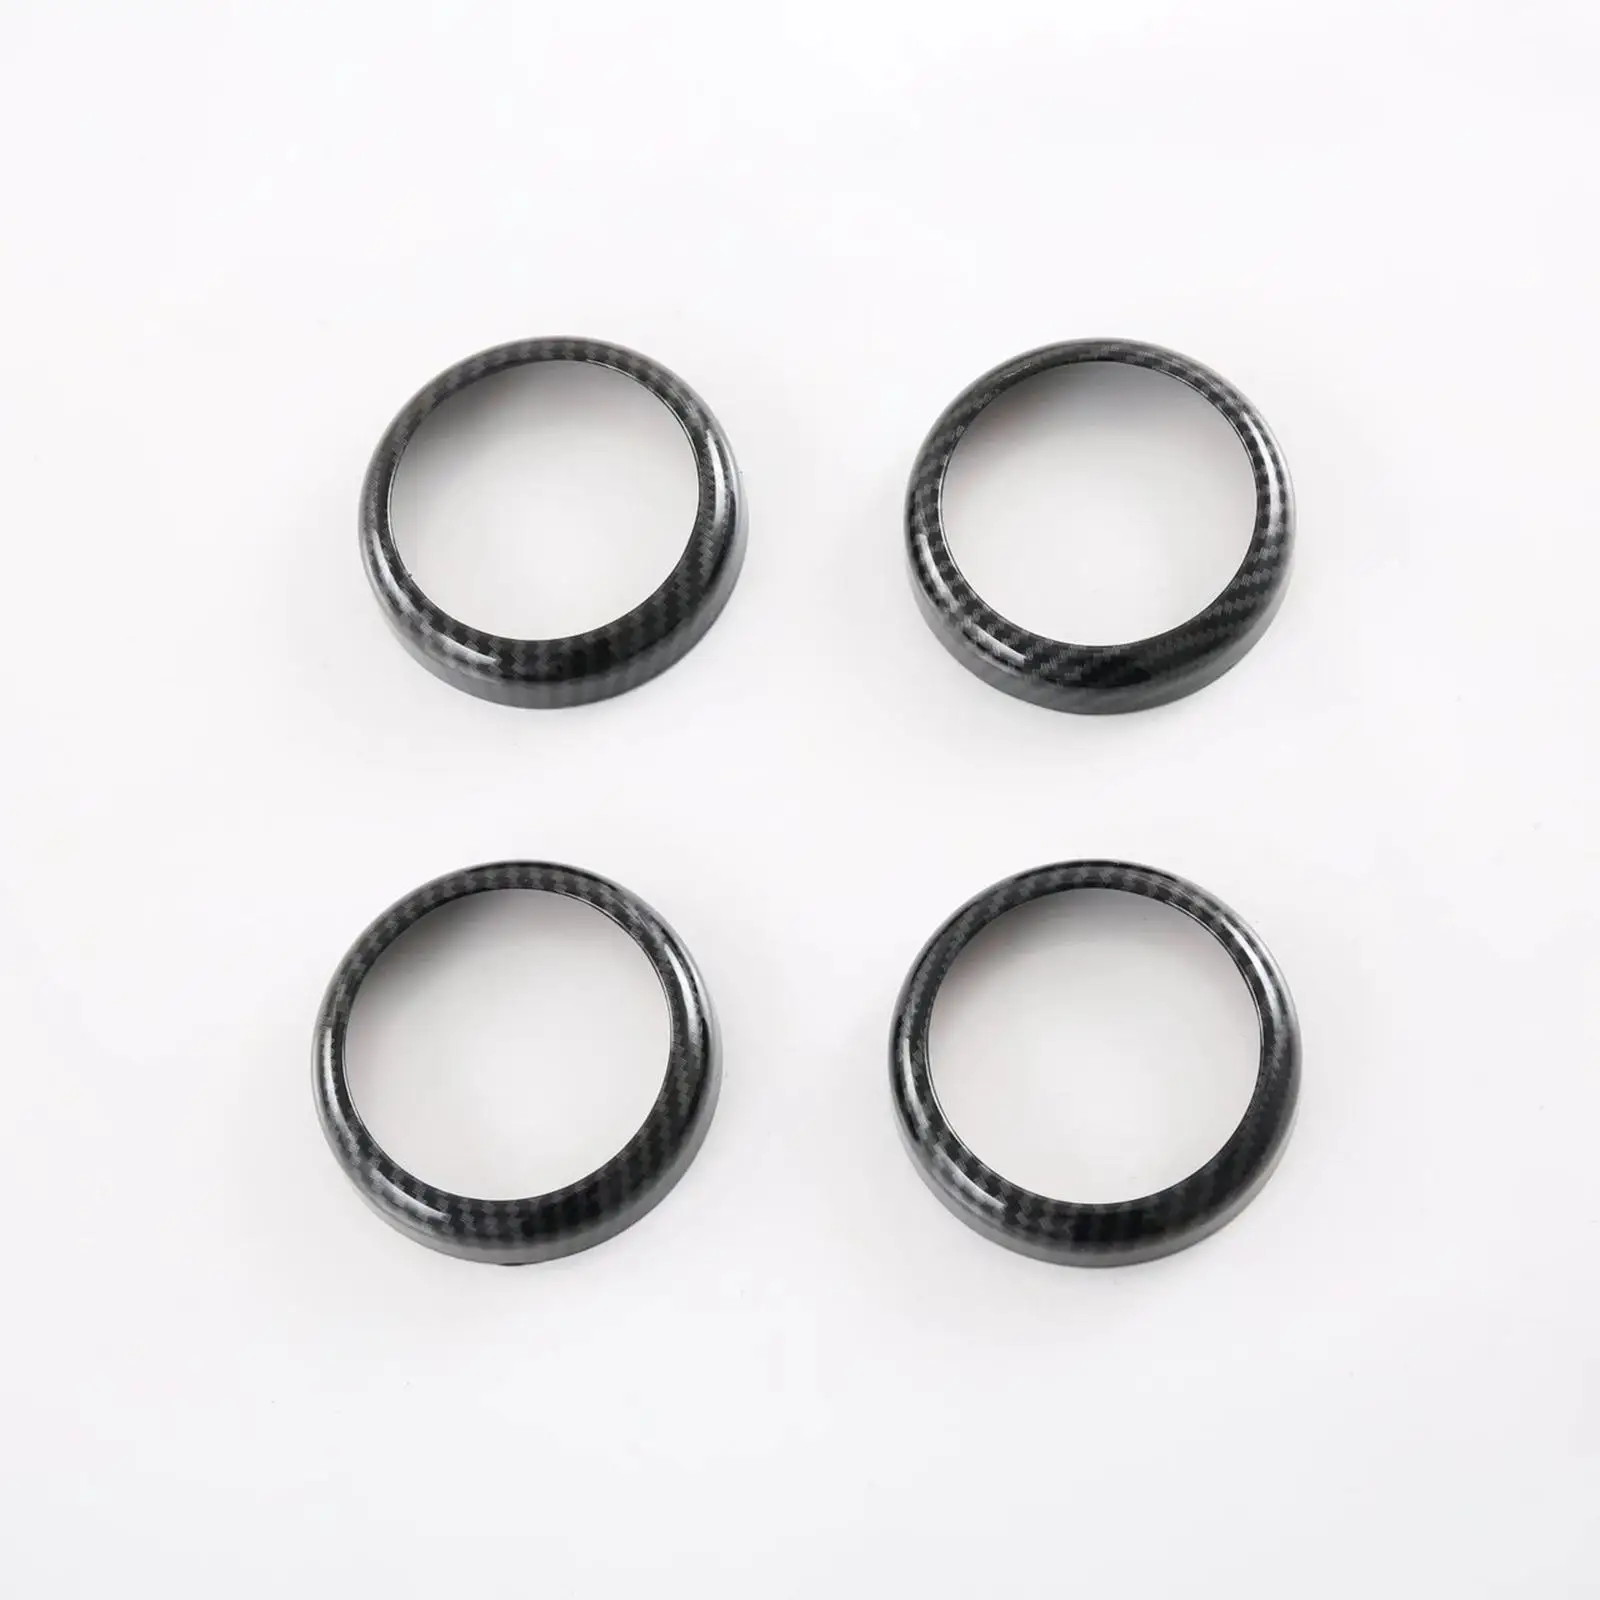 4x Door Speaker Rings Stickers Trims for Byd Atto 3 Yuan Plus Easy to Install